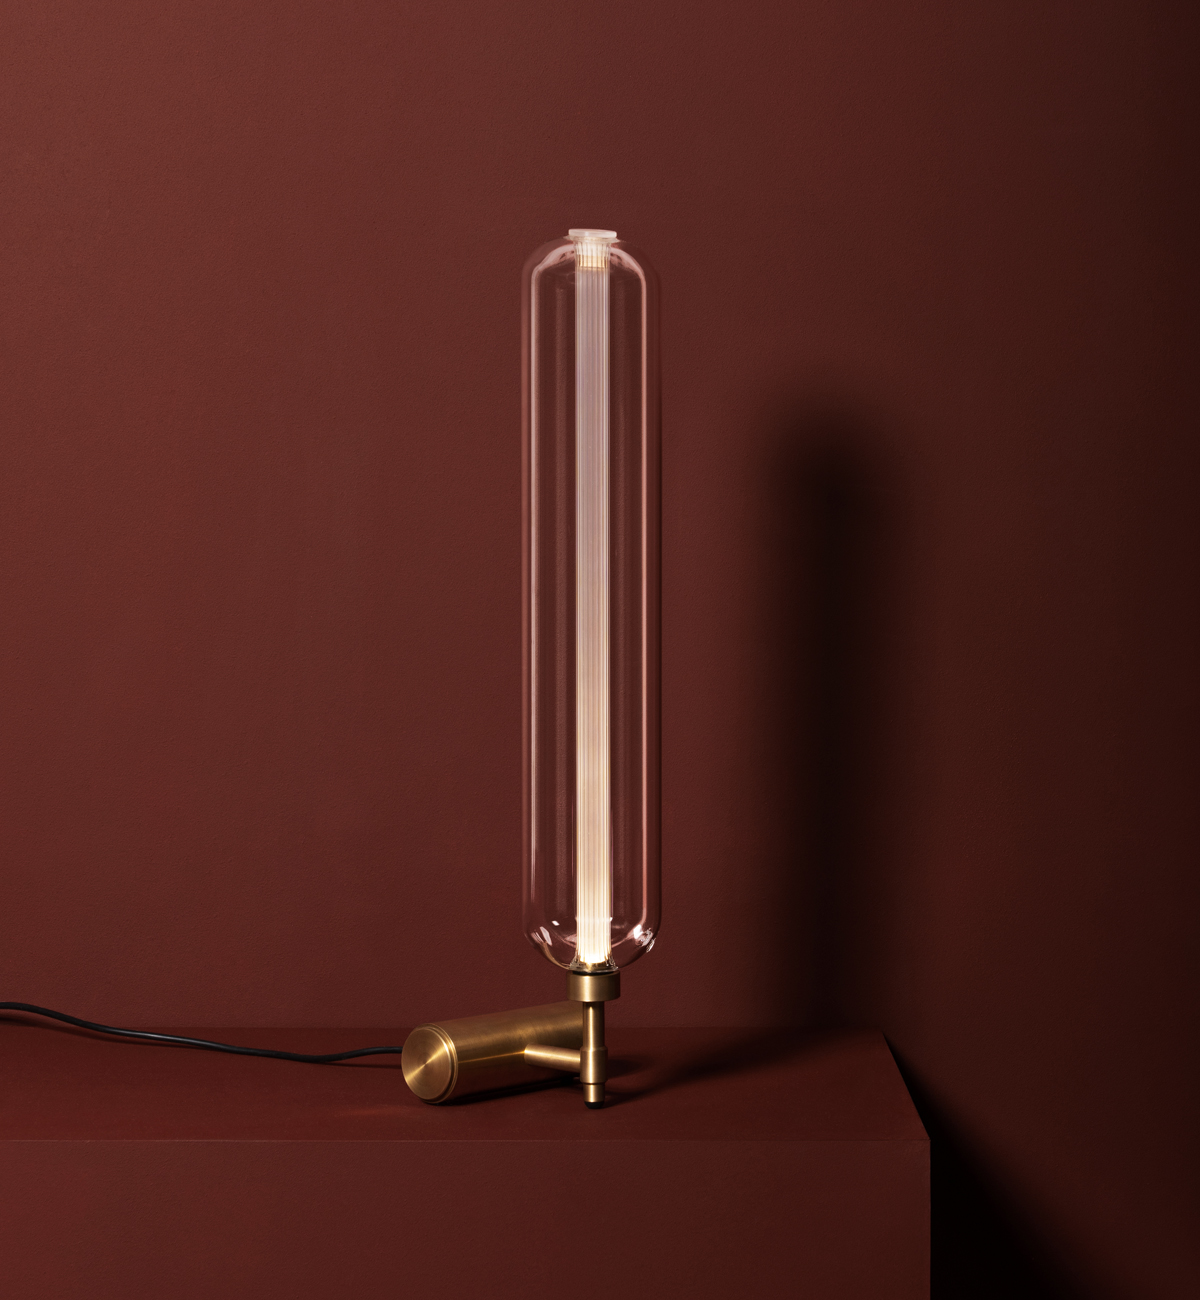 Scintilla lamp by Pietro Russo Dante Goods and Bads